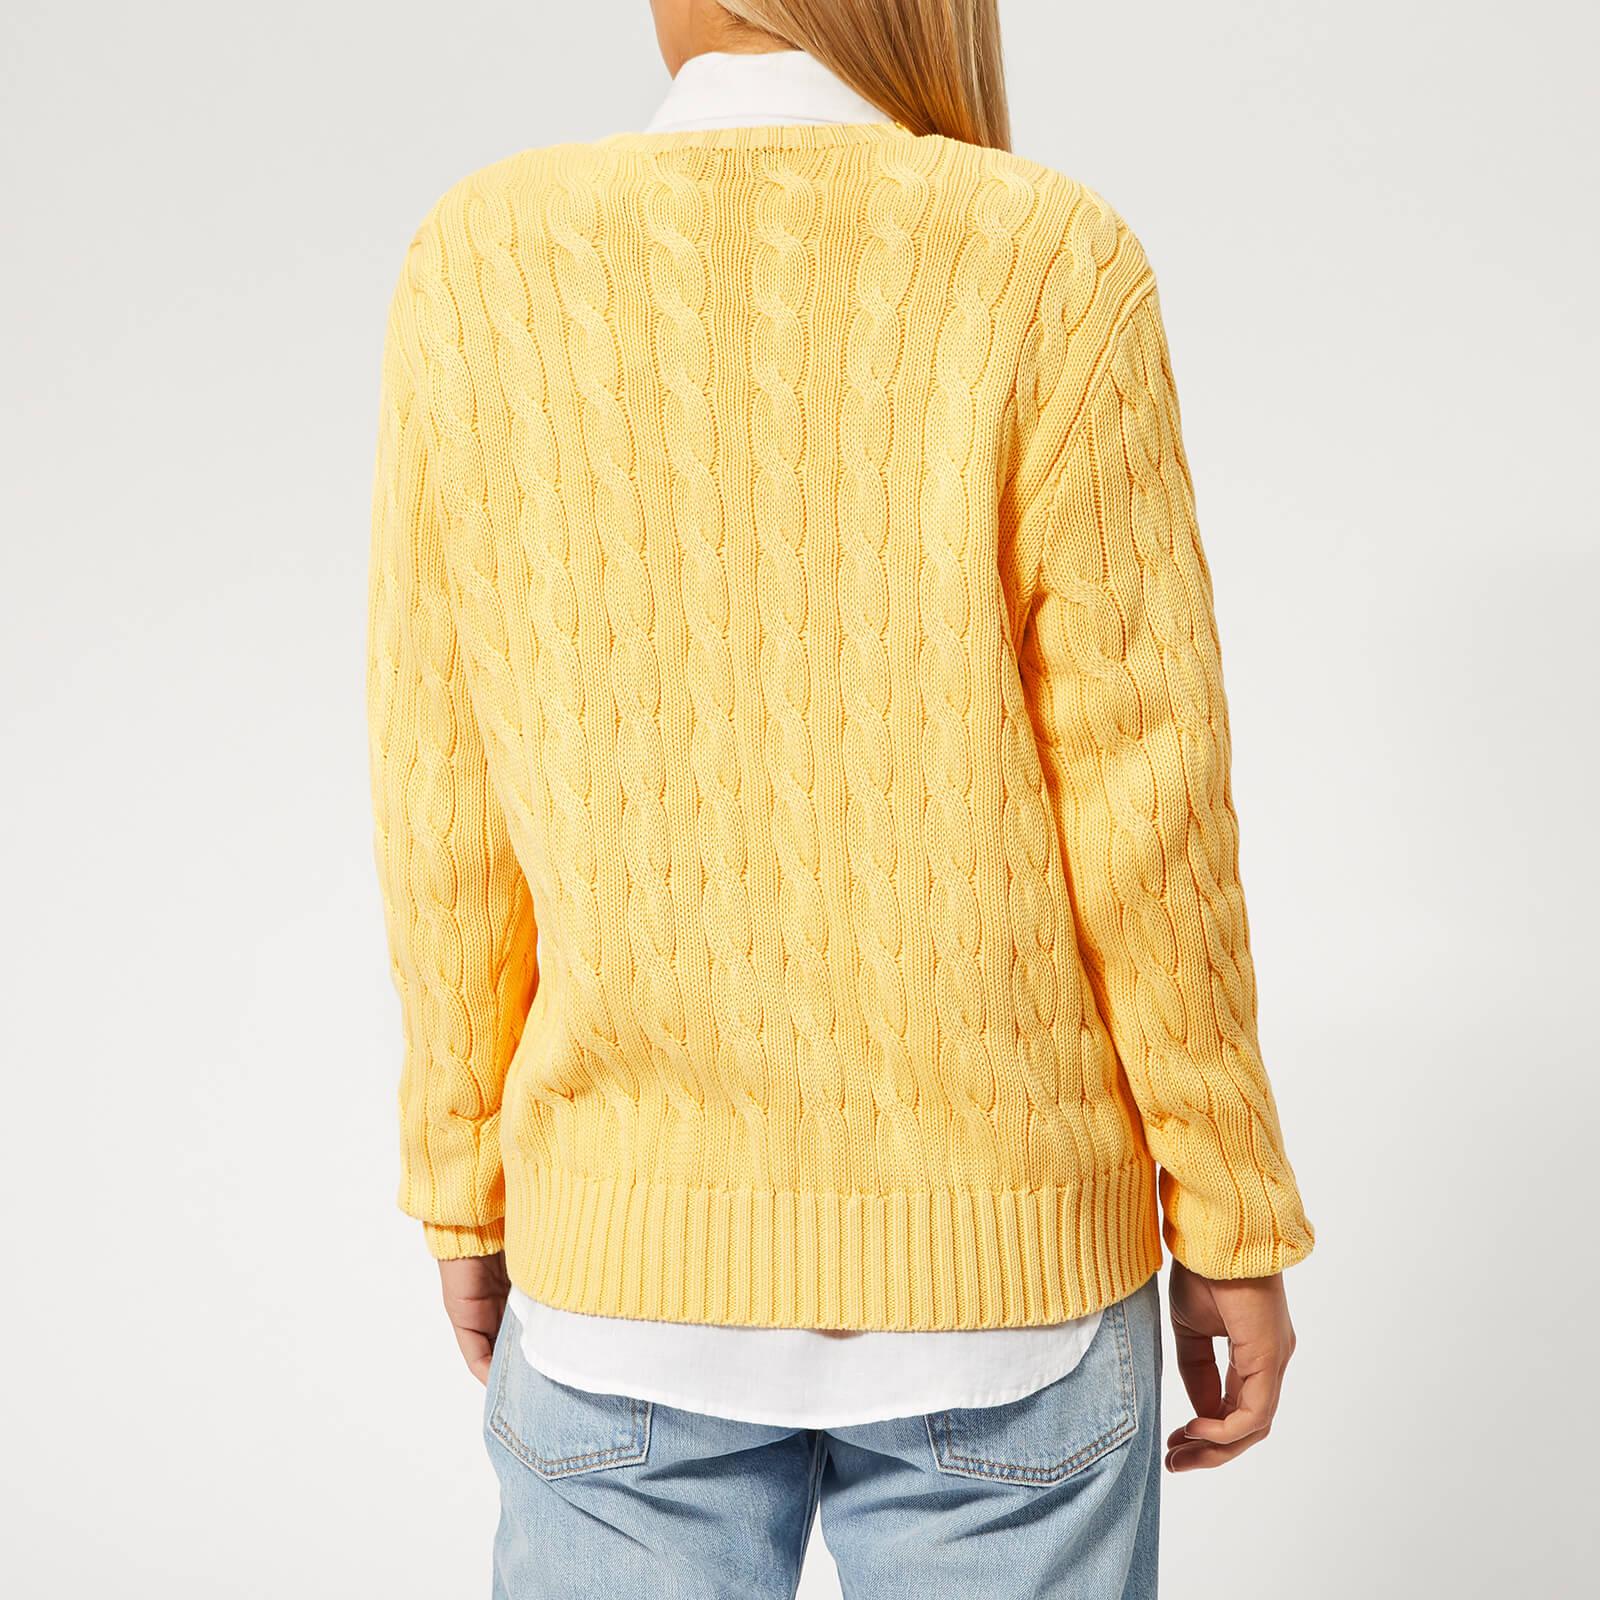 Polo Ralph Lauren Cotton Cable Knit Sweater in Cream (Yellow) - Lyst